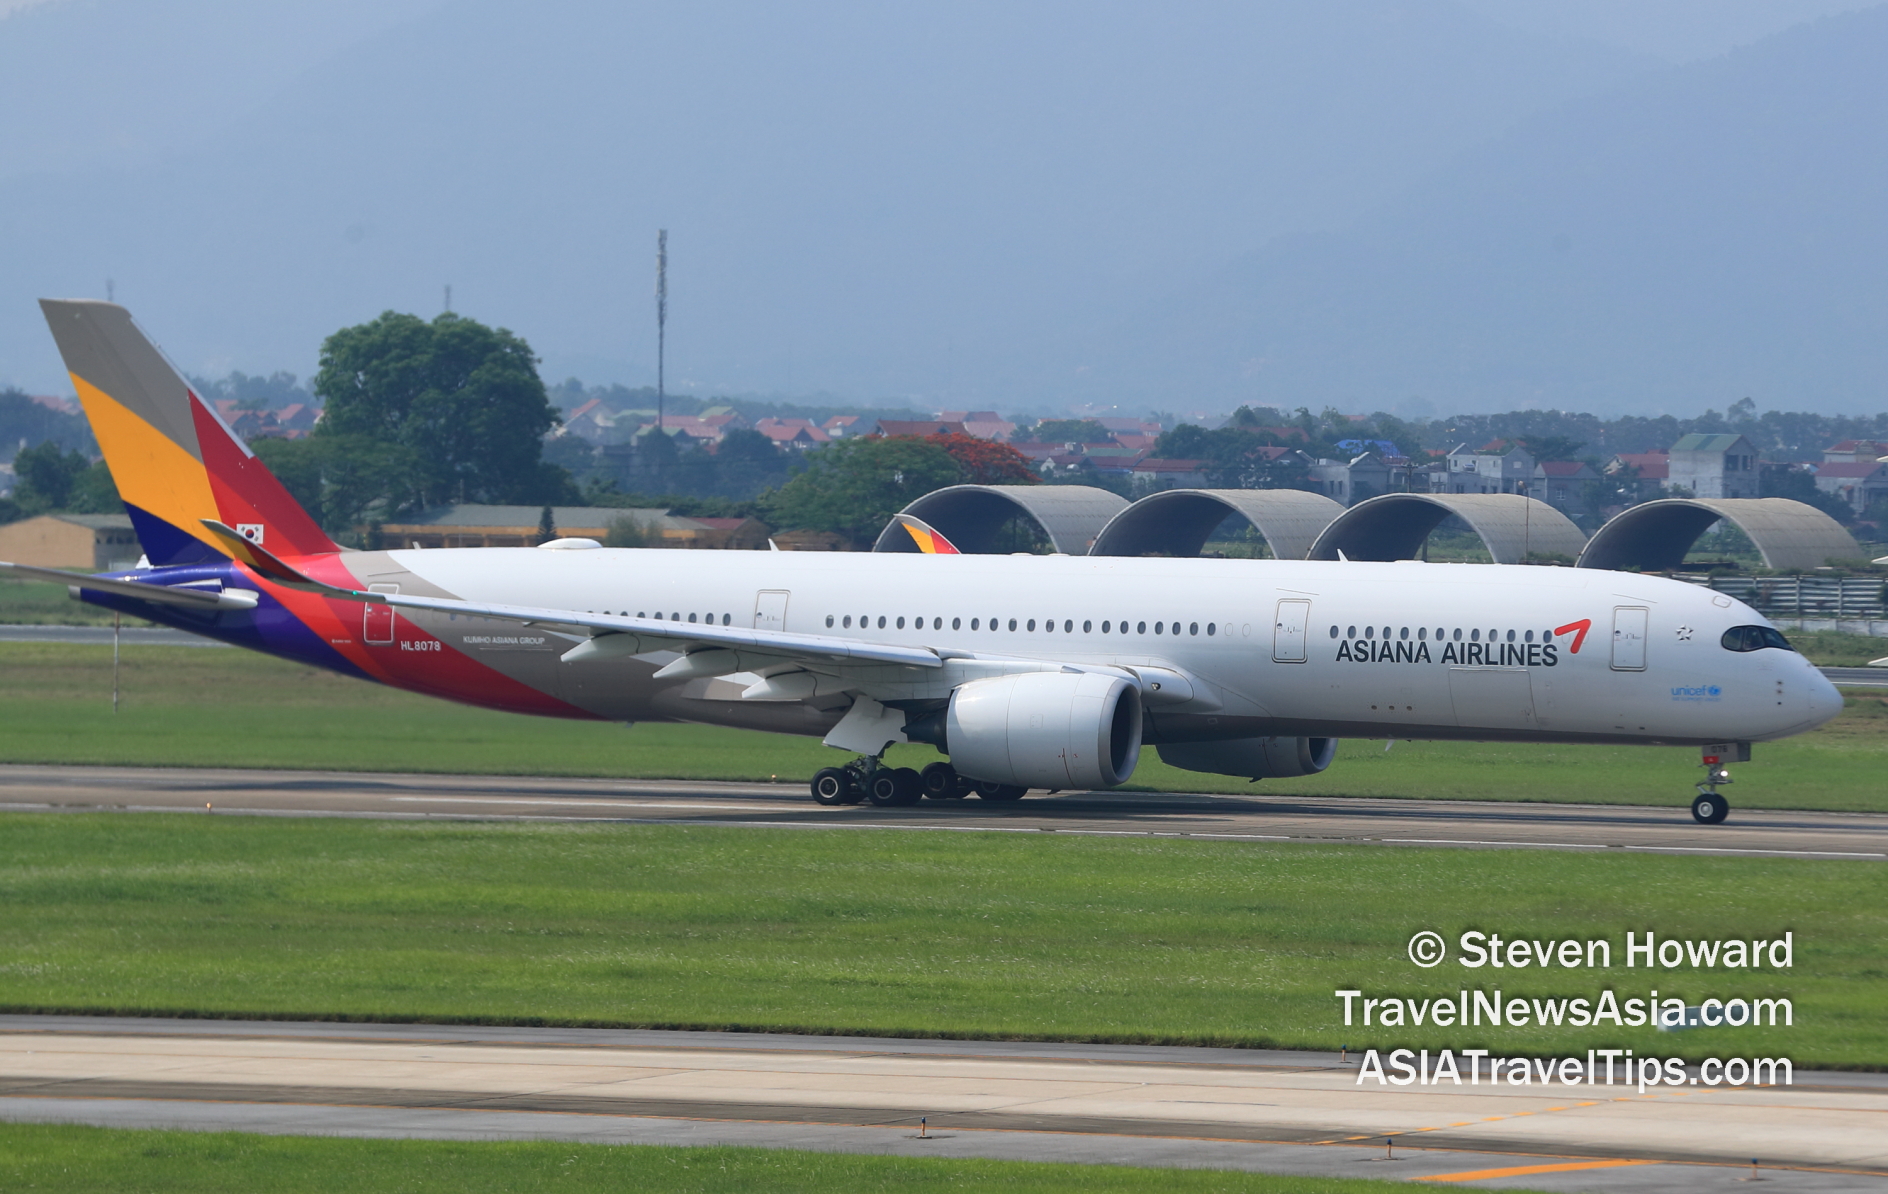 Asiana Airlines A350 reg: HL-8078. Picture by Steven Howard of TravelNewsAsia.com Click to enlarge.